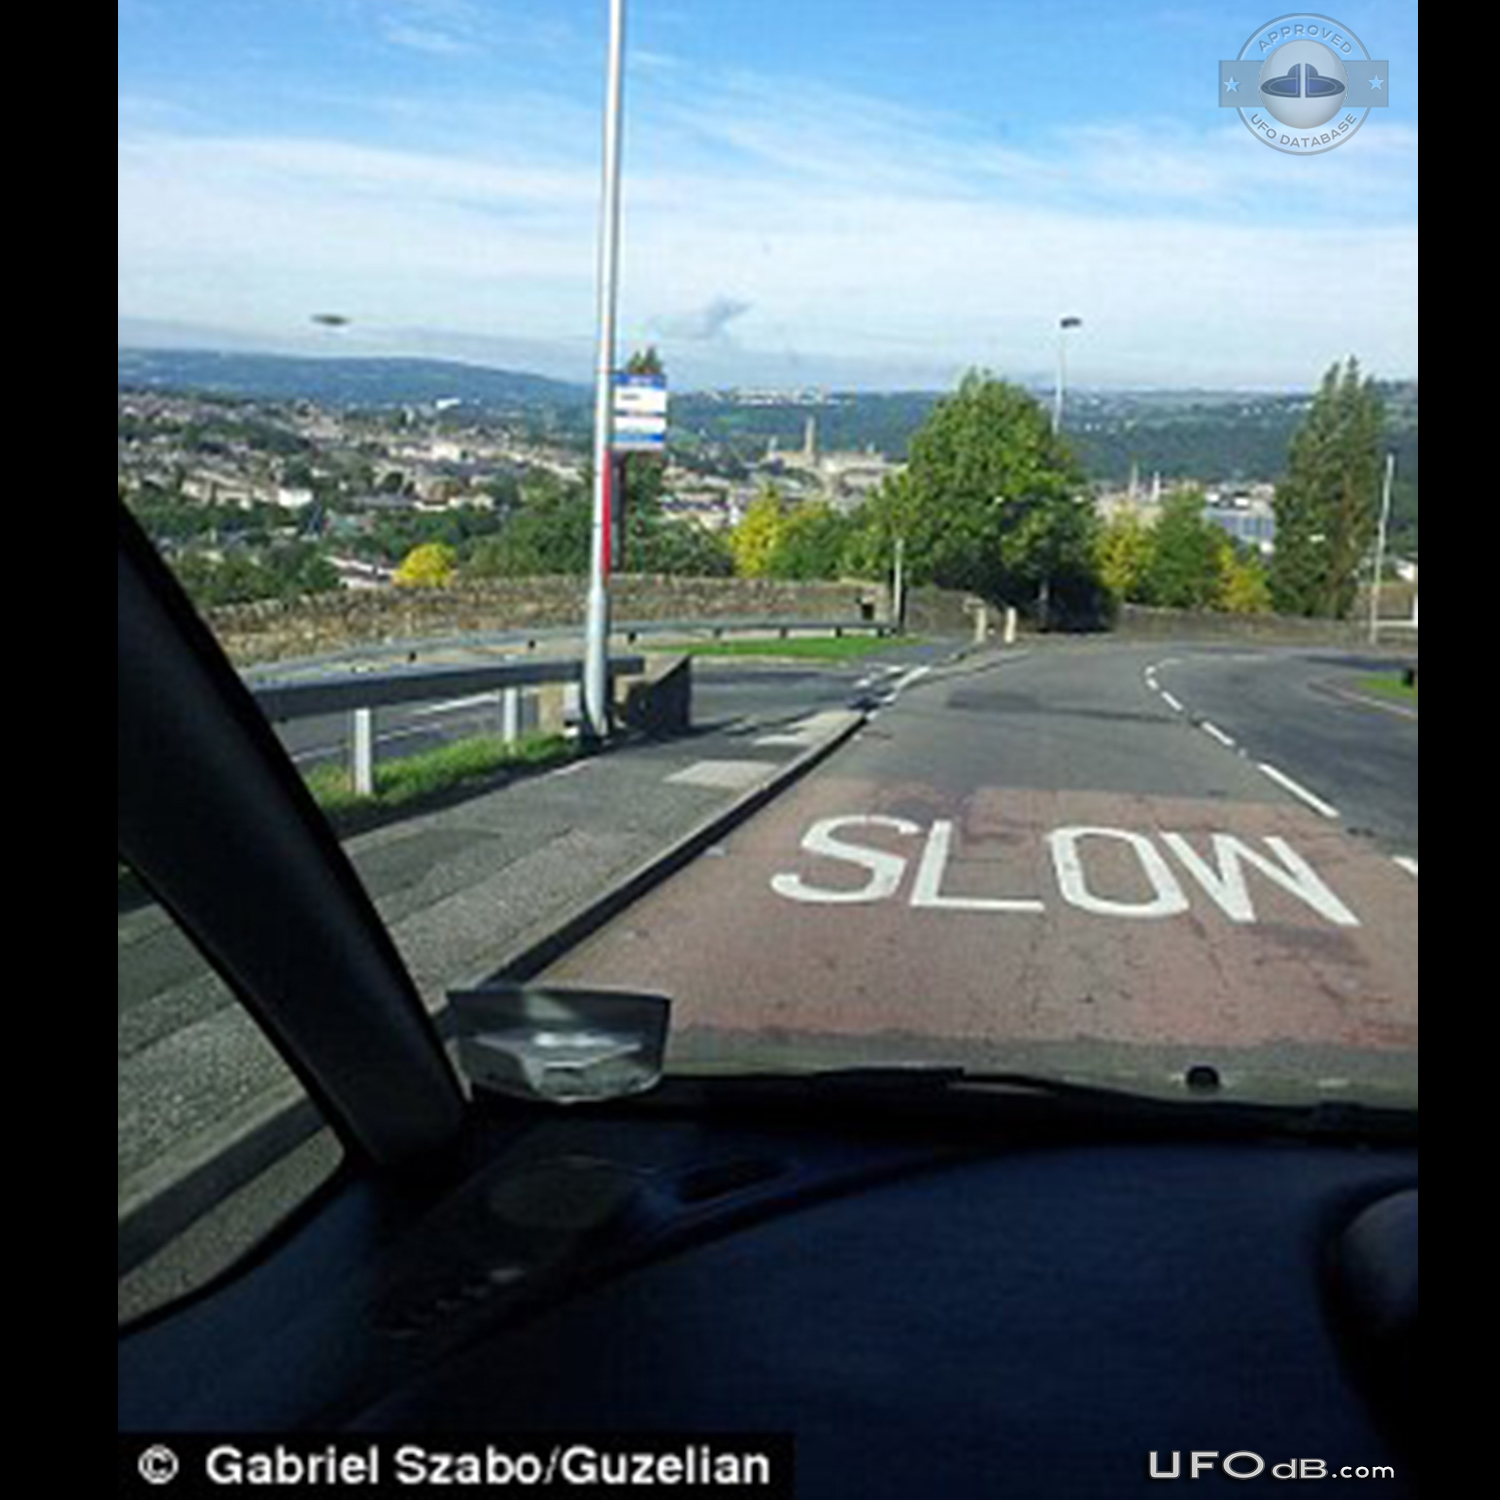 neighborhood picture captures UFO in Shipley west Yorkshire UK 2014 UFO Picture #586-1